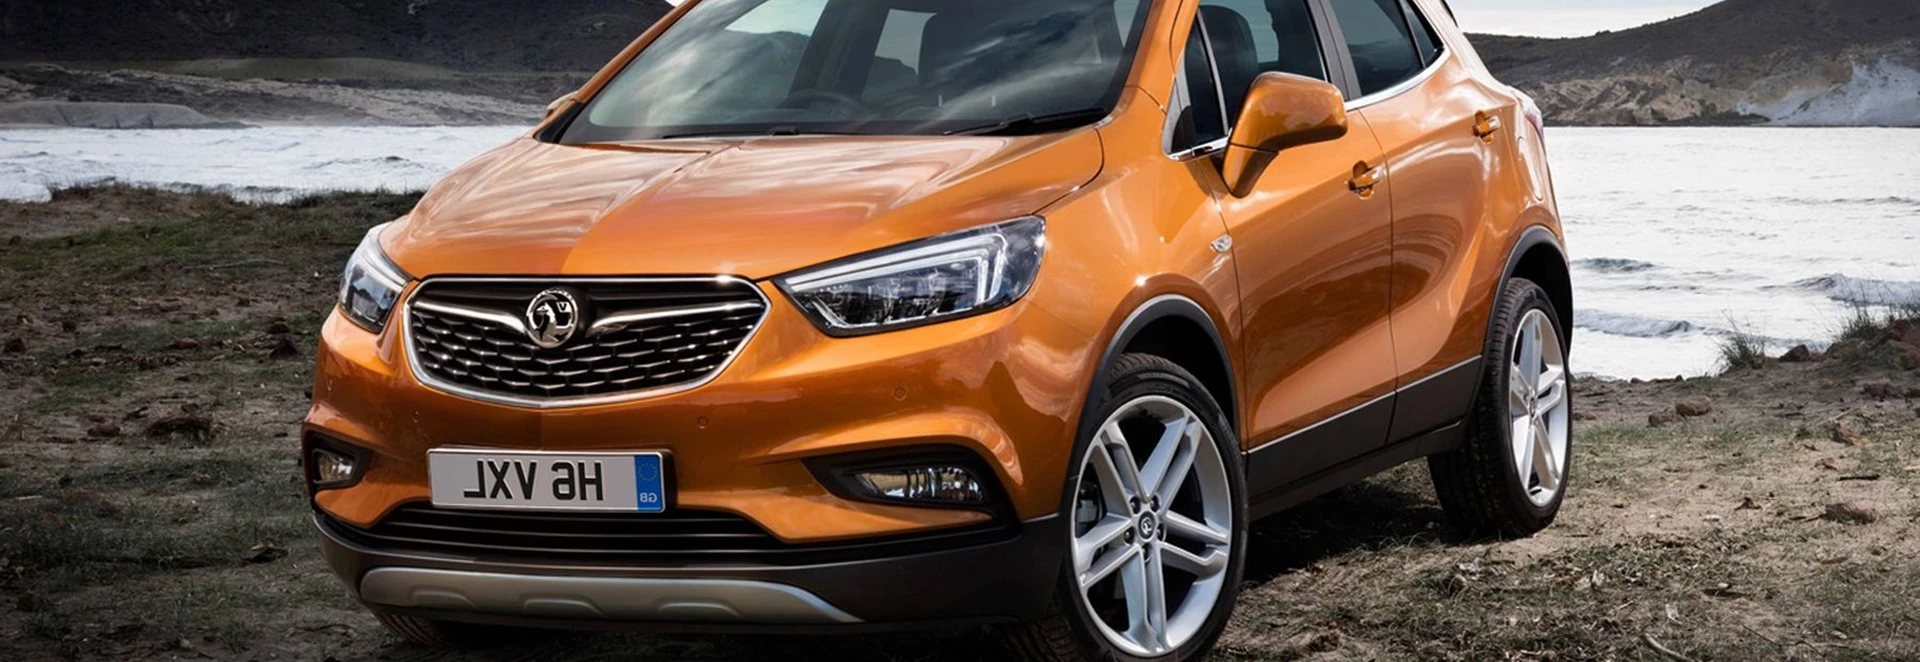 First look at the Vauxhall Crossland X 